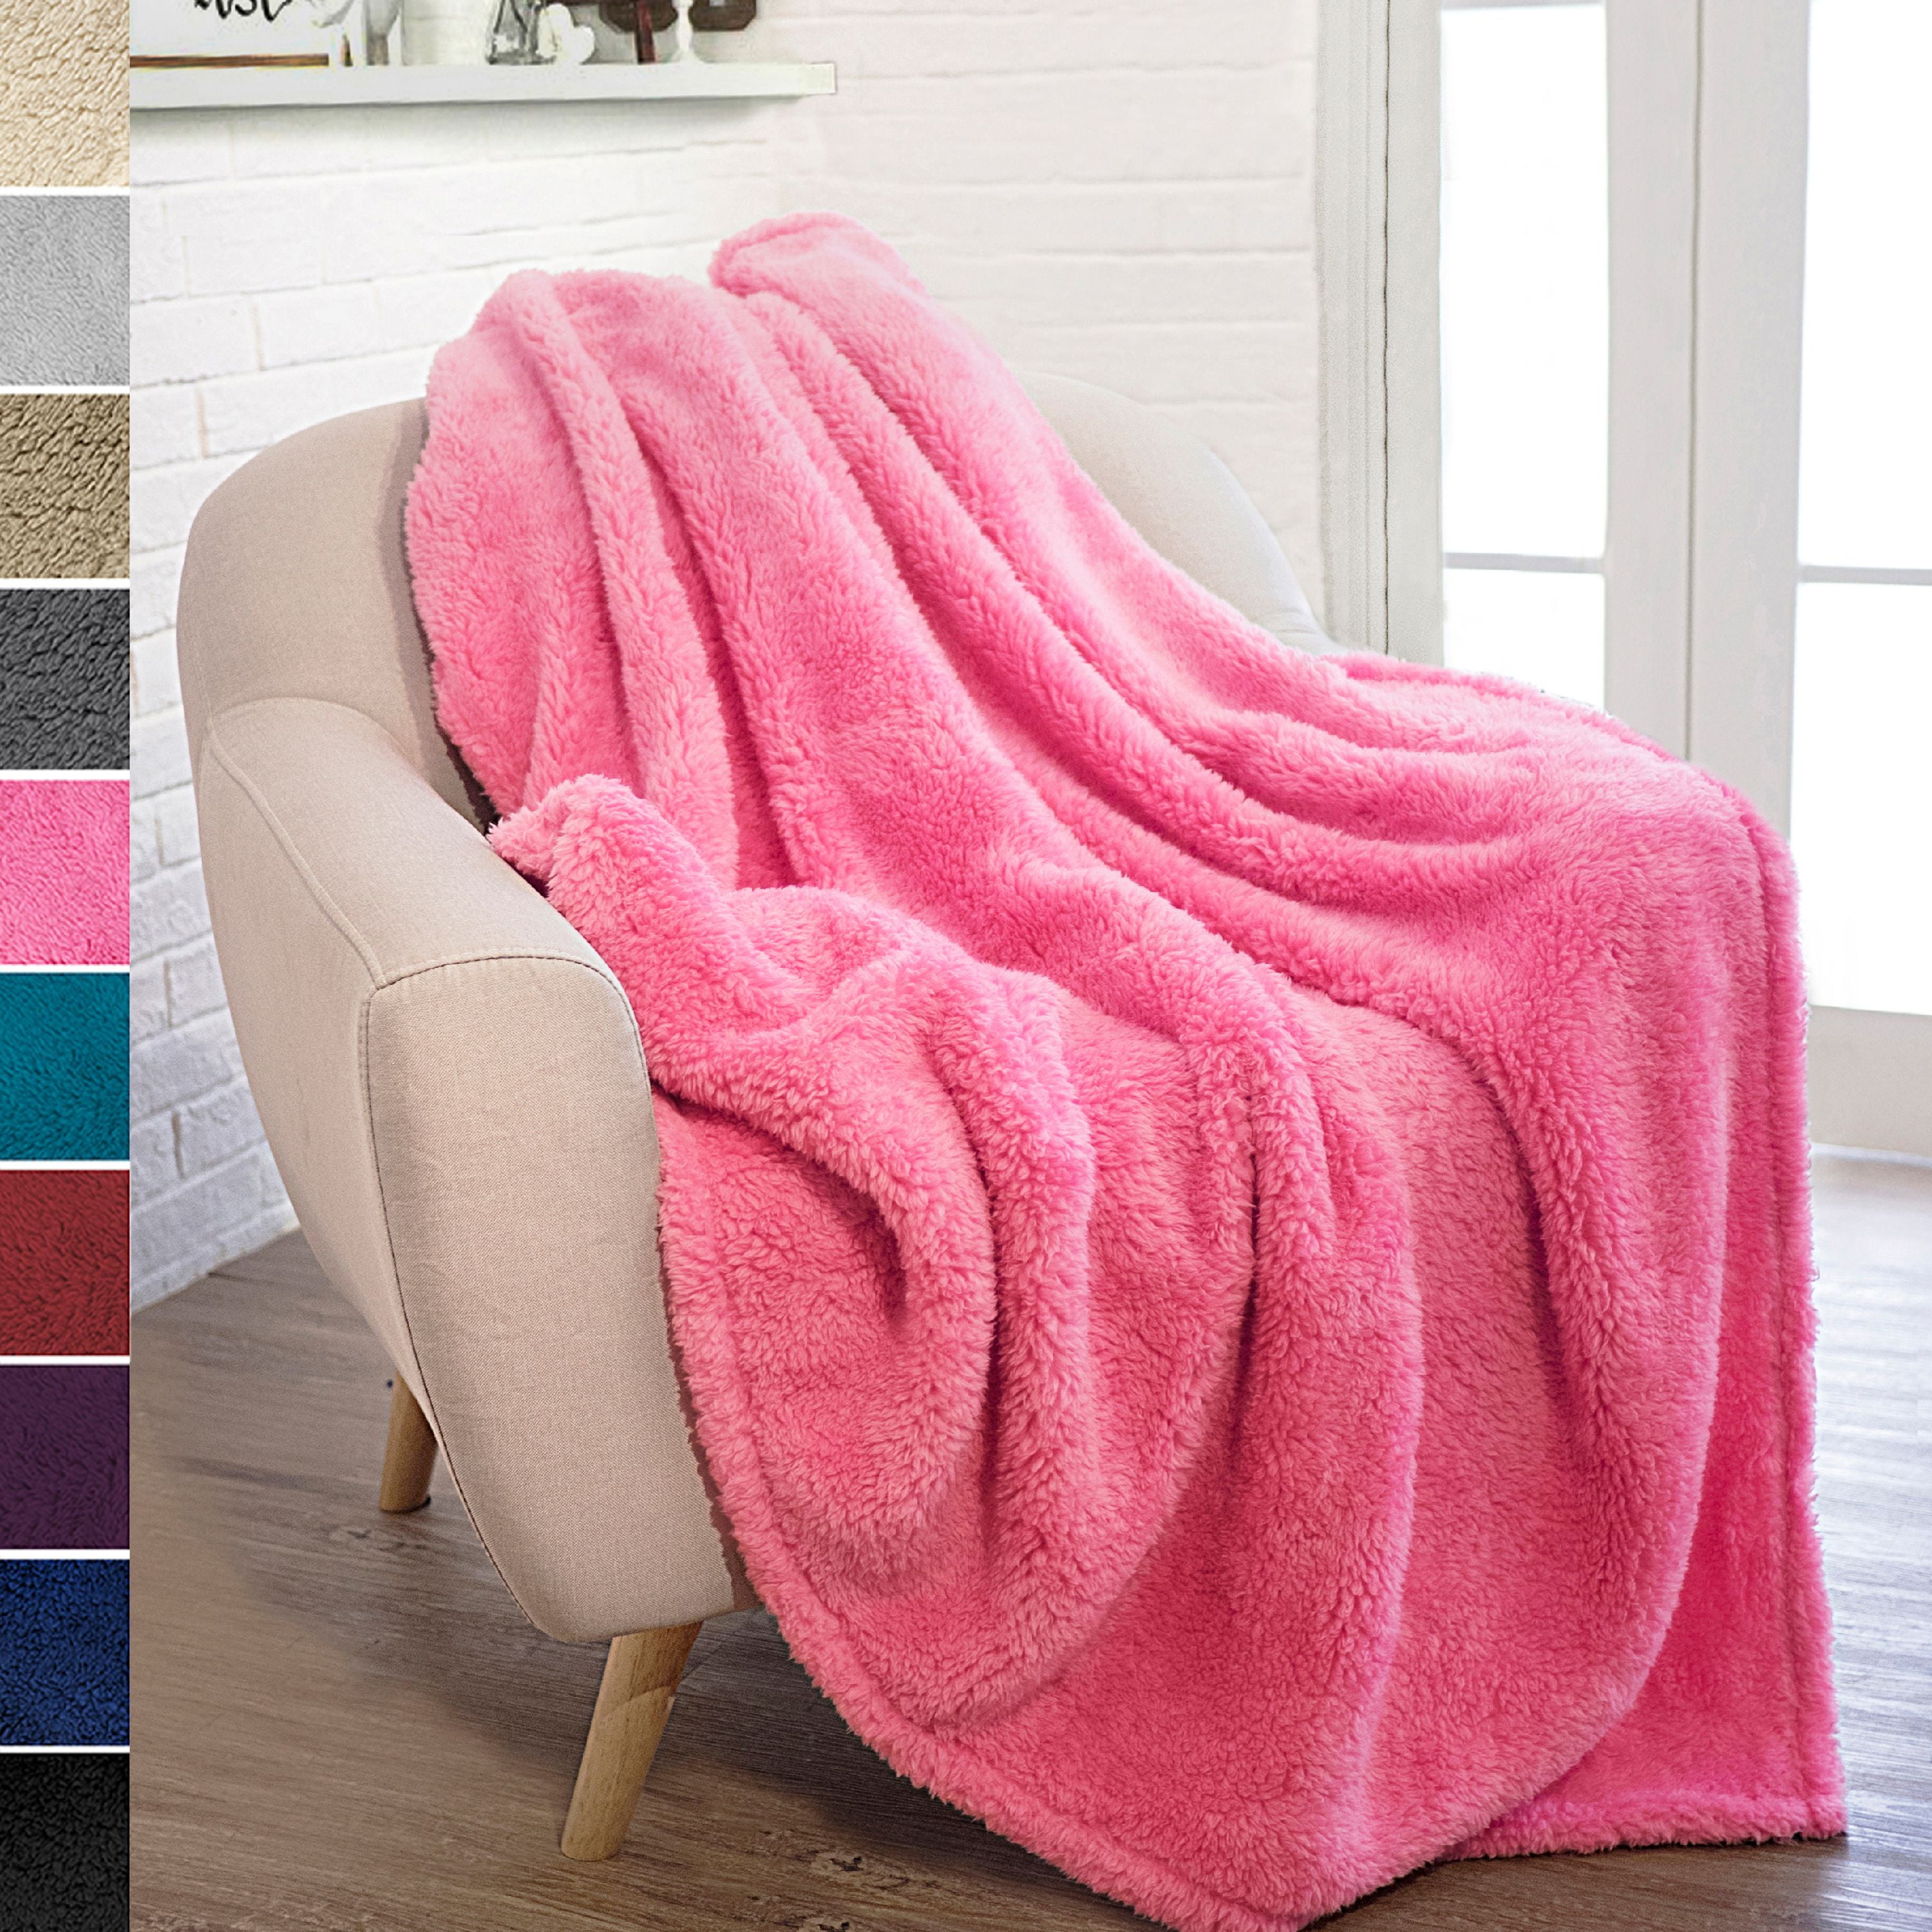 Double Fluffy Warm Sofa Microfiber Blanket Blanket， Blankets Throws Large， Individual Double Solid Blanket 5 Colors Doubl Throw Blanket Artificial wool blanket Blanket Thickened Double Layer， Single